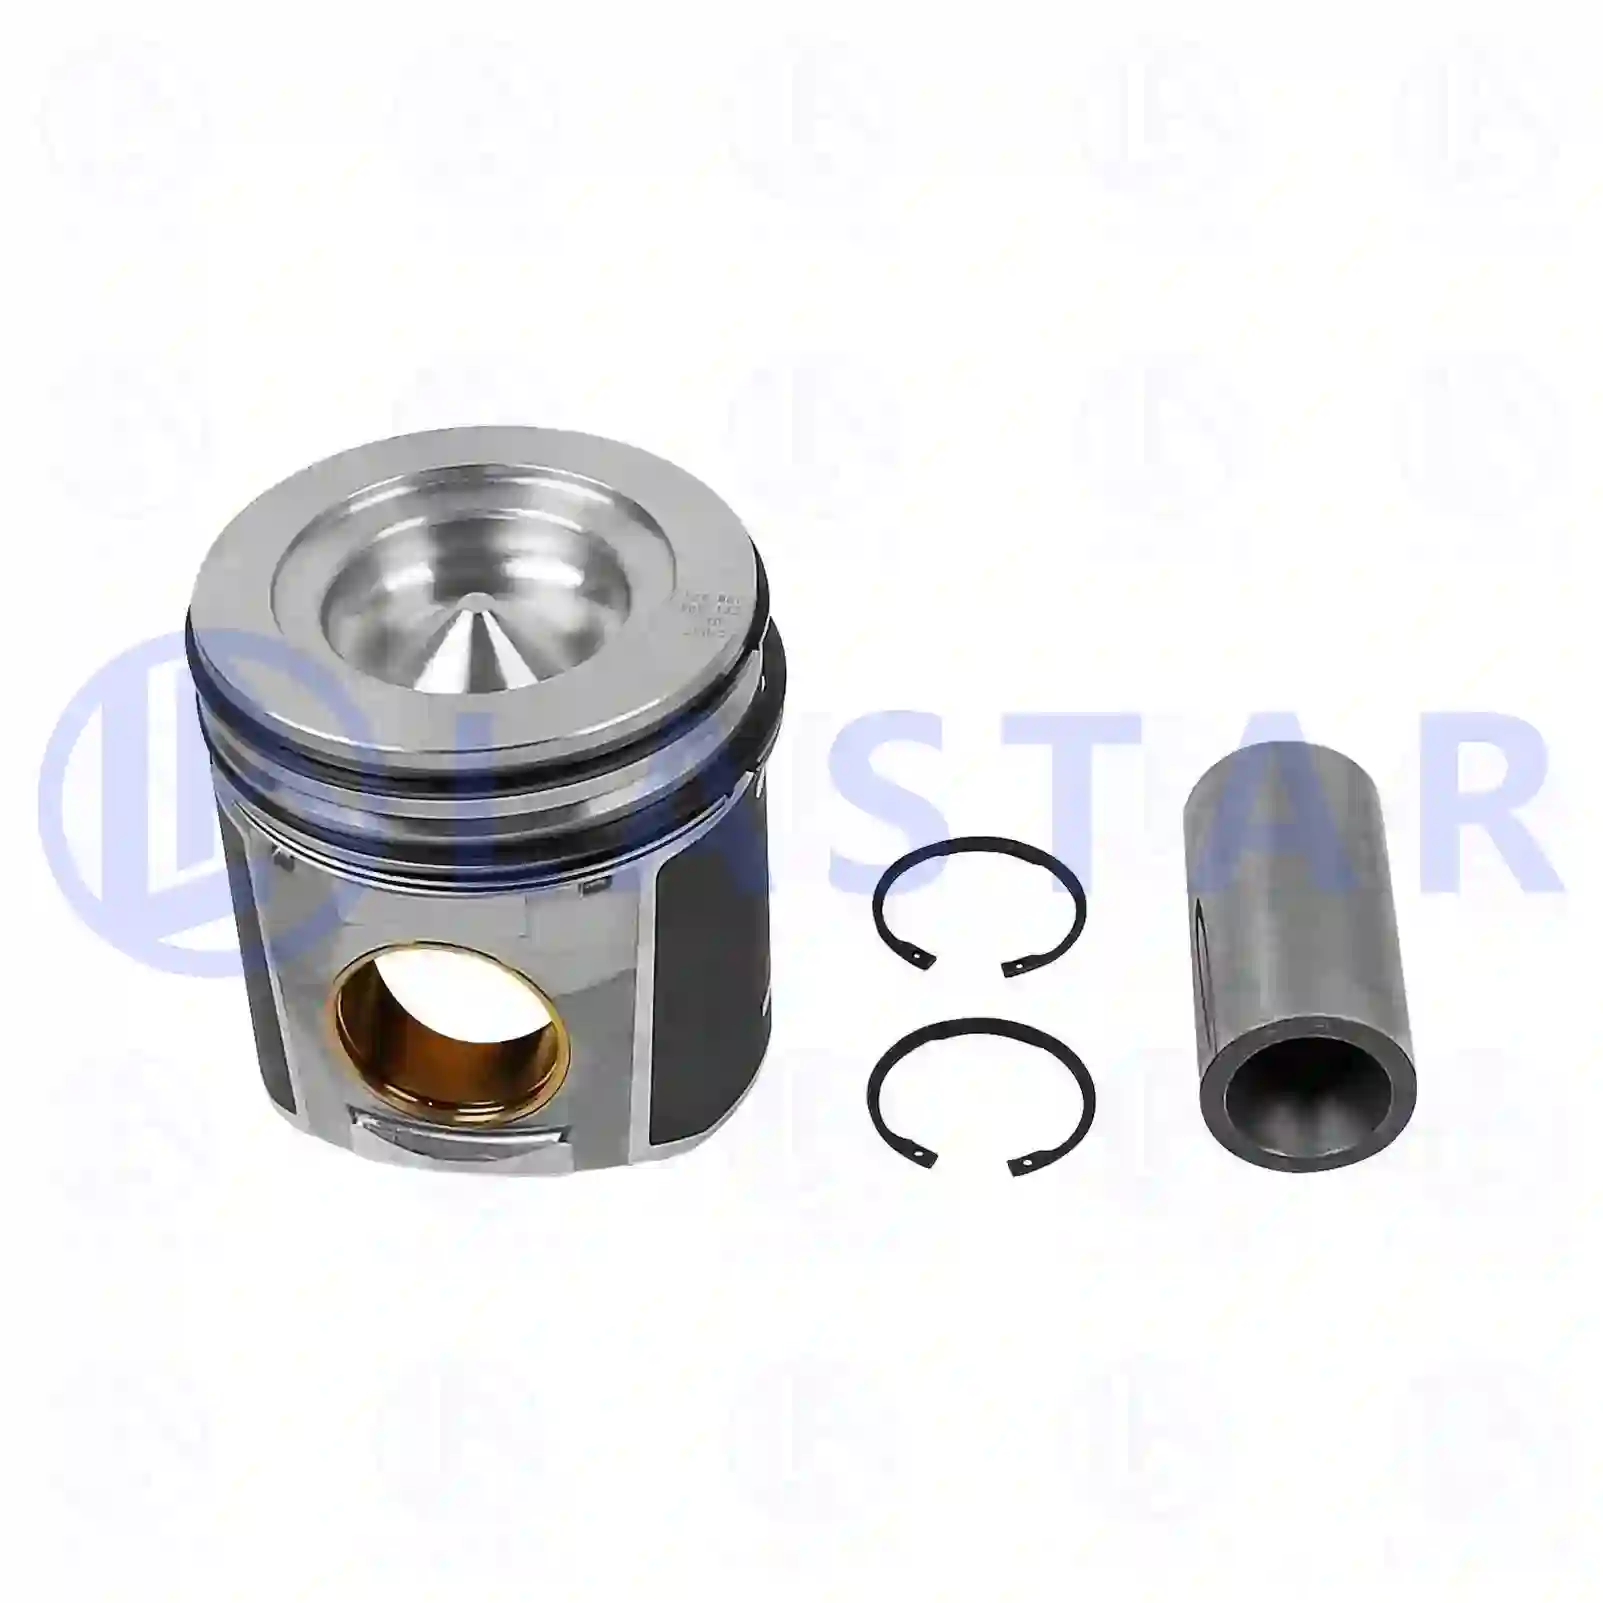 Piston, complete with rings, 77701187, 02996141, 02996319, 02996796, 02997436, 2996141, 2996319, 2996796, 2997436, 500054837, 500054838 ||  77701187 Lastar Spare Part | Truck Spare Parts, Auotomotive Spare Parts Piston, complete with rings, 77701187, 02996141, 02996319, 02996796, 02997436, 2996141, 2996319, 2996796, 2997436, 500054837, 500054838 ||  77701187 Lastar Spare Part | Truck Spare Parts, Auotomotive Spare Parts